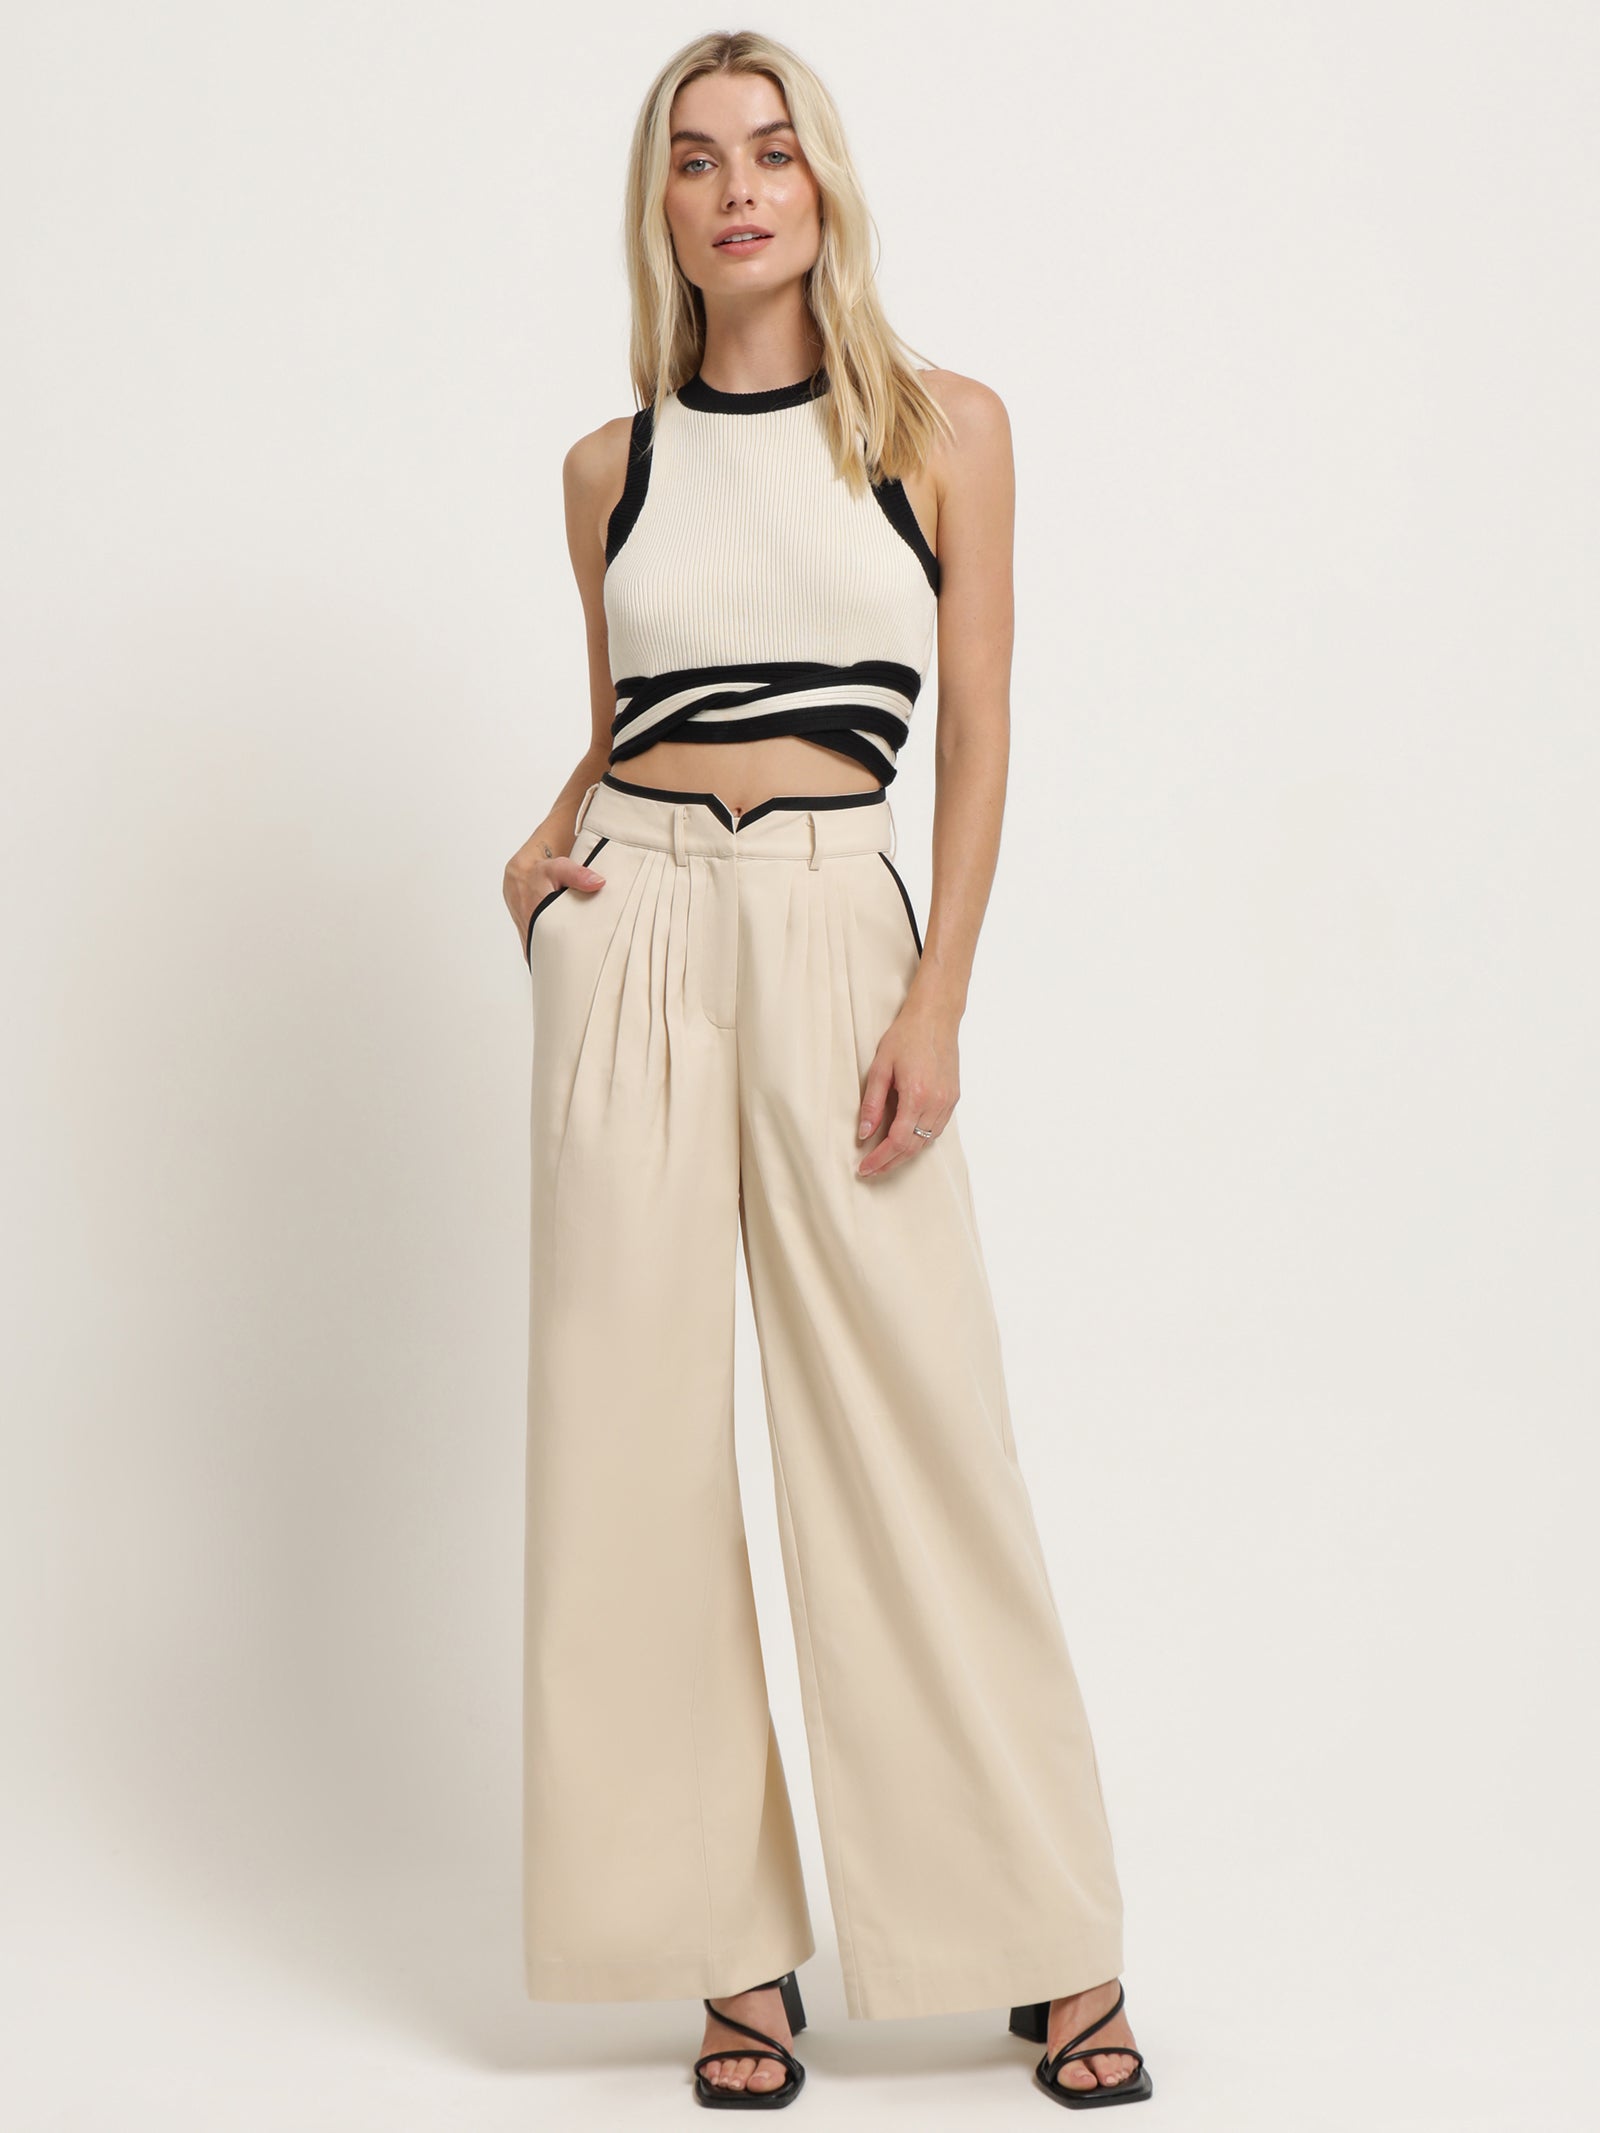 Express Pants in Neutral